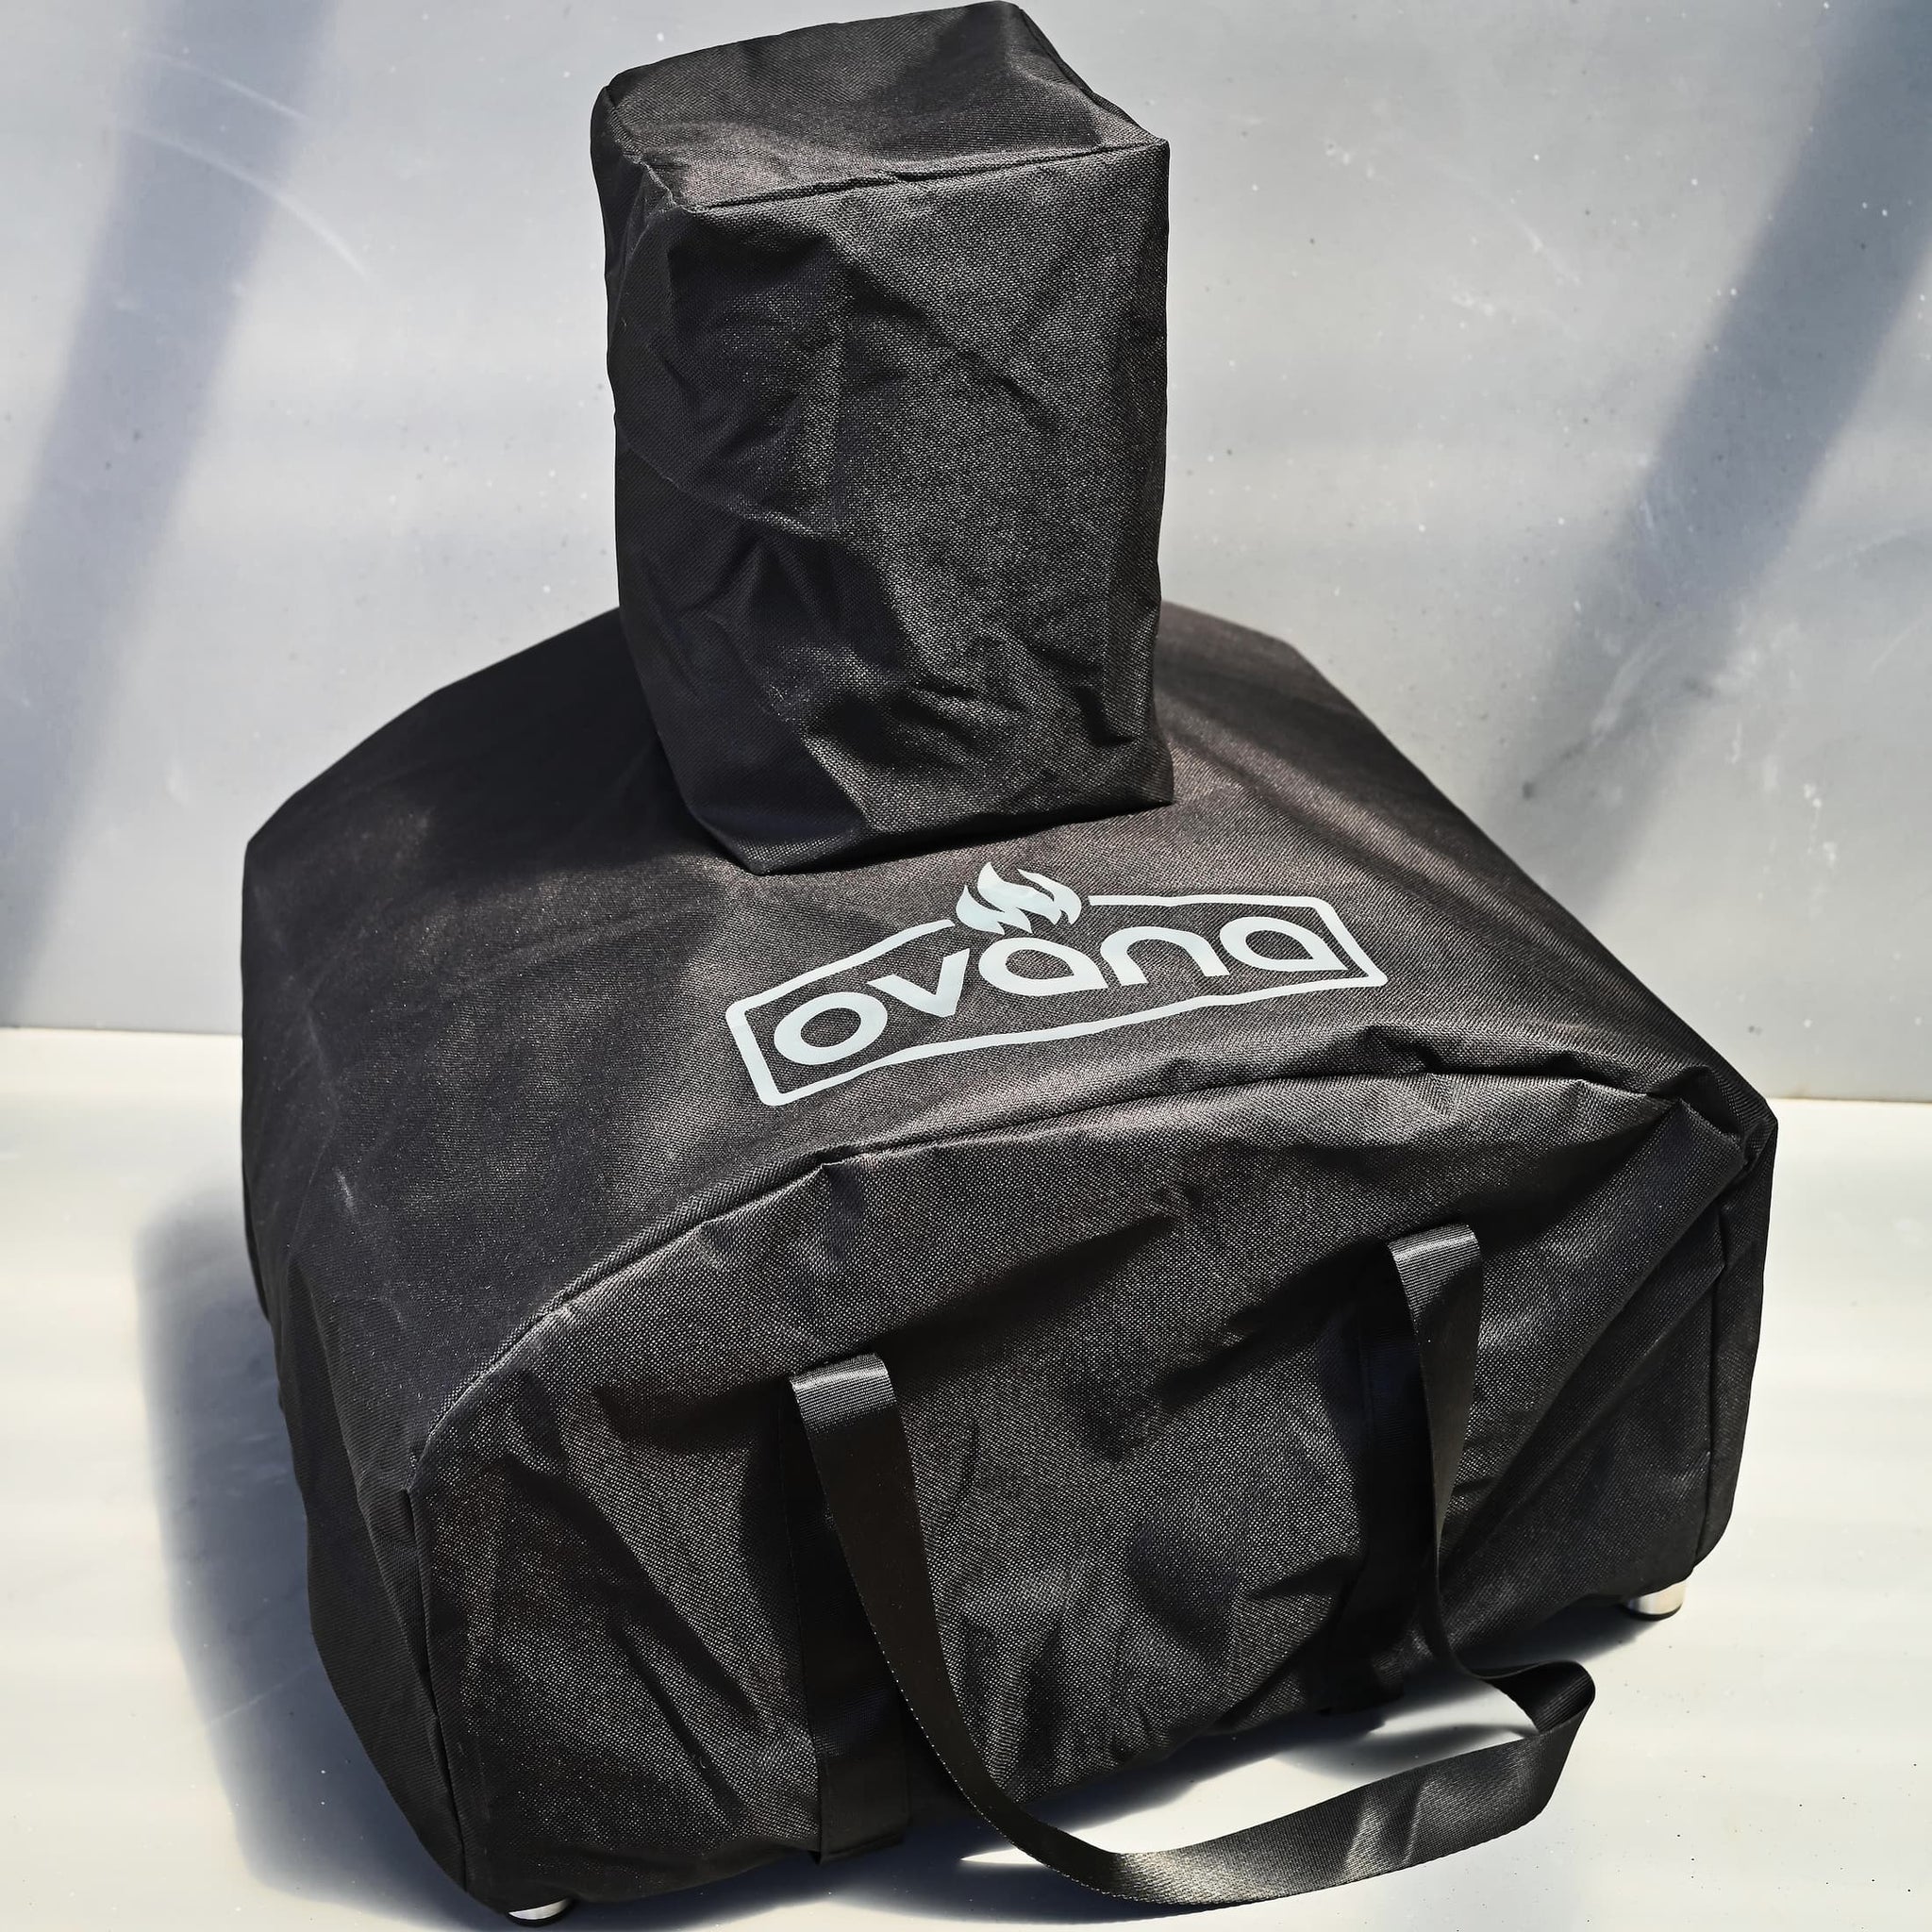 Thermomix® Ovana Waterproof Carry Cover